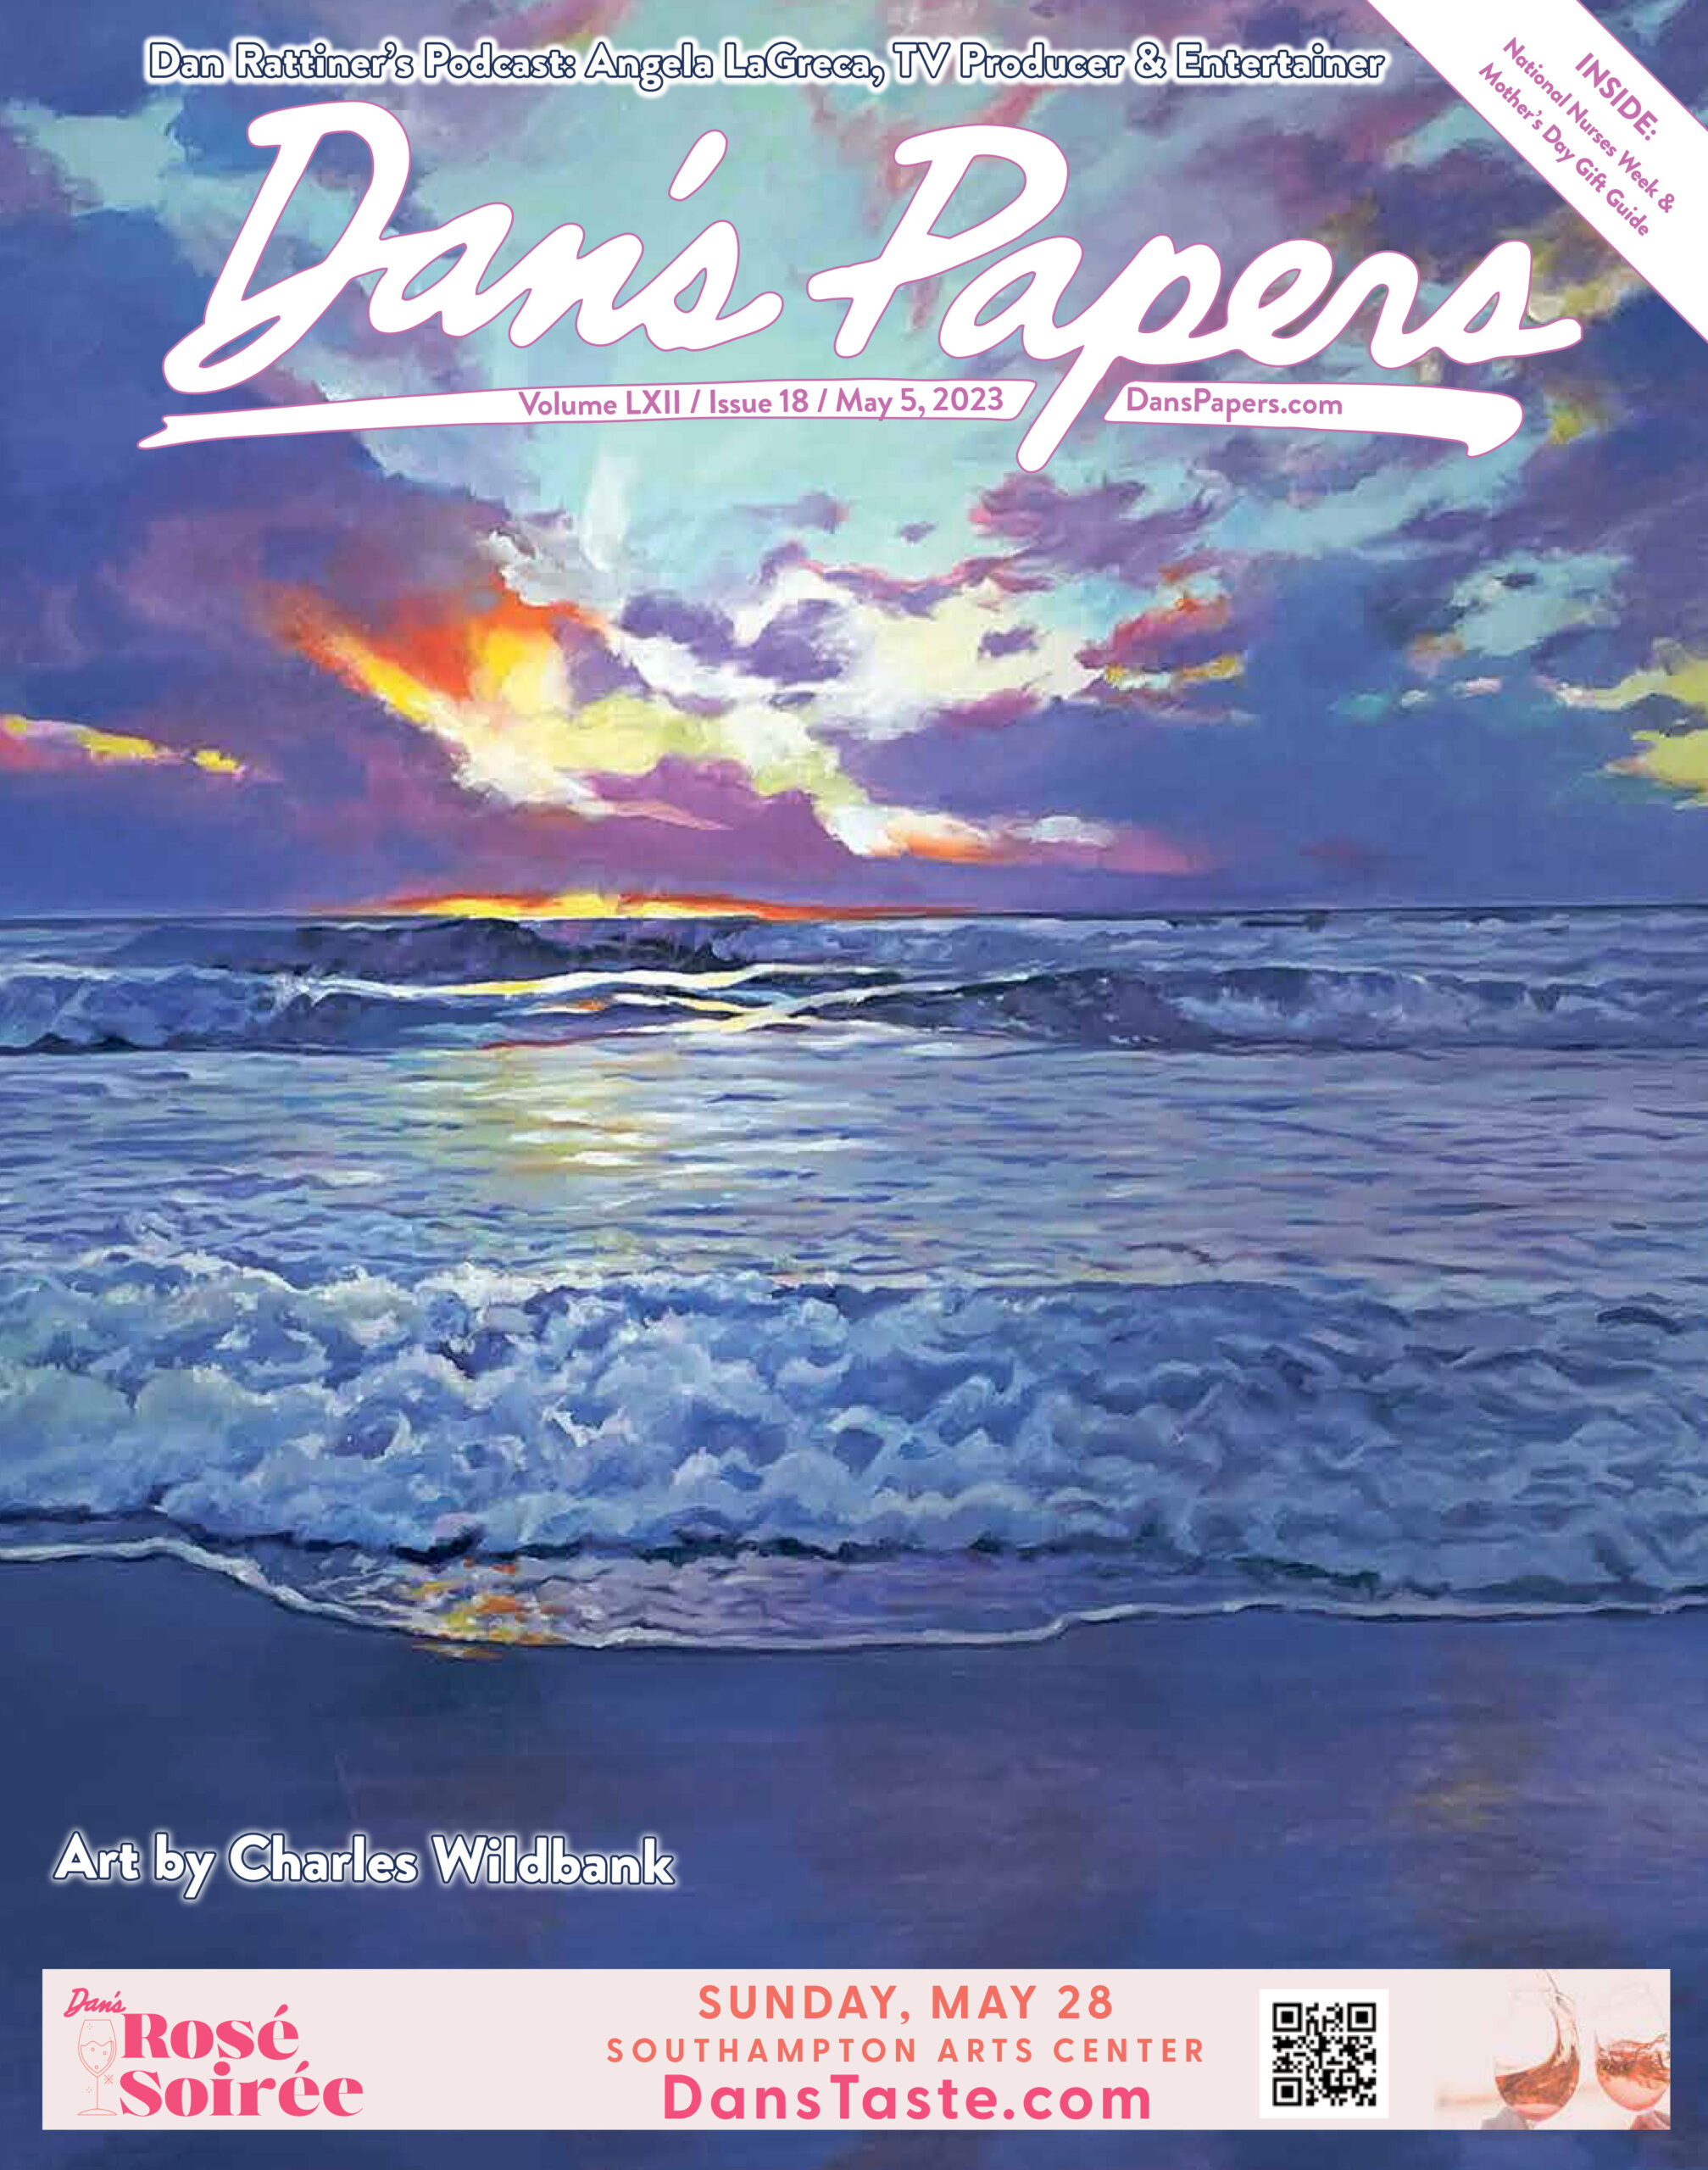 May 5, 2023 Dan's Papers cover art by Charles Wildbank